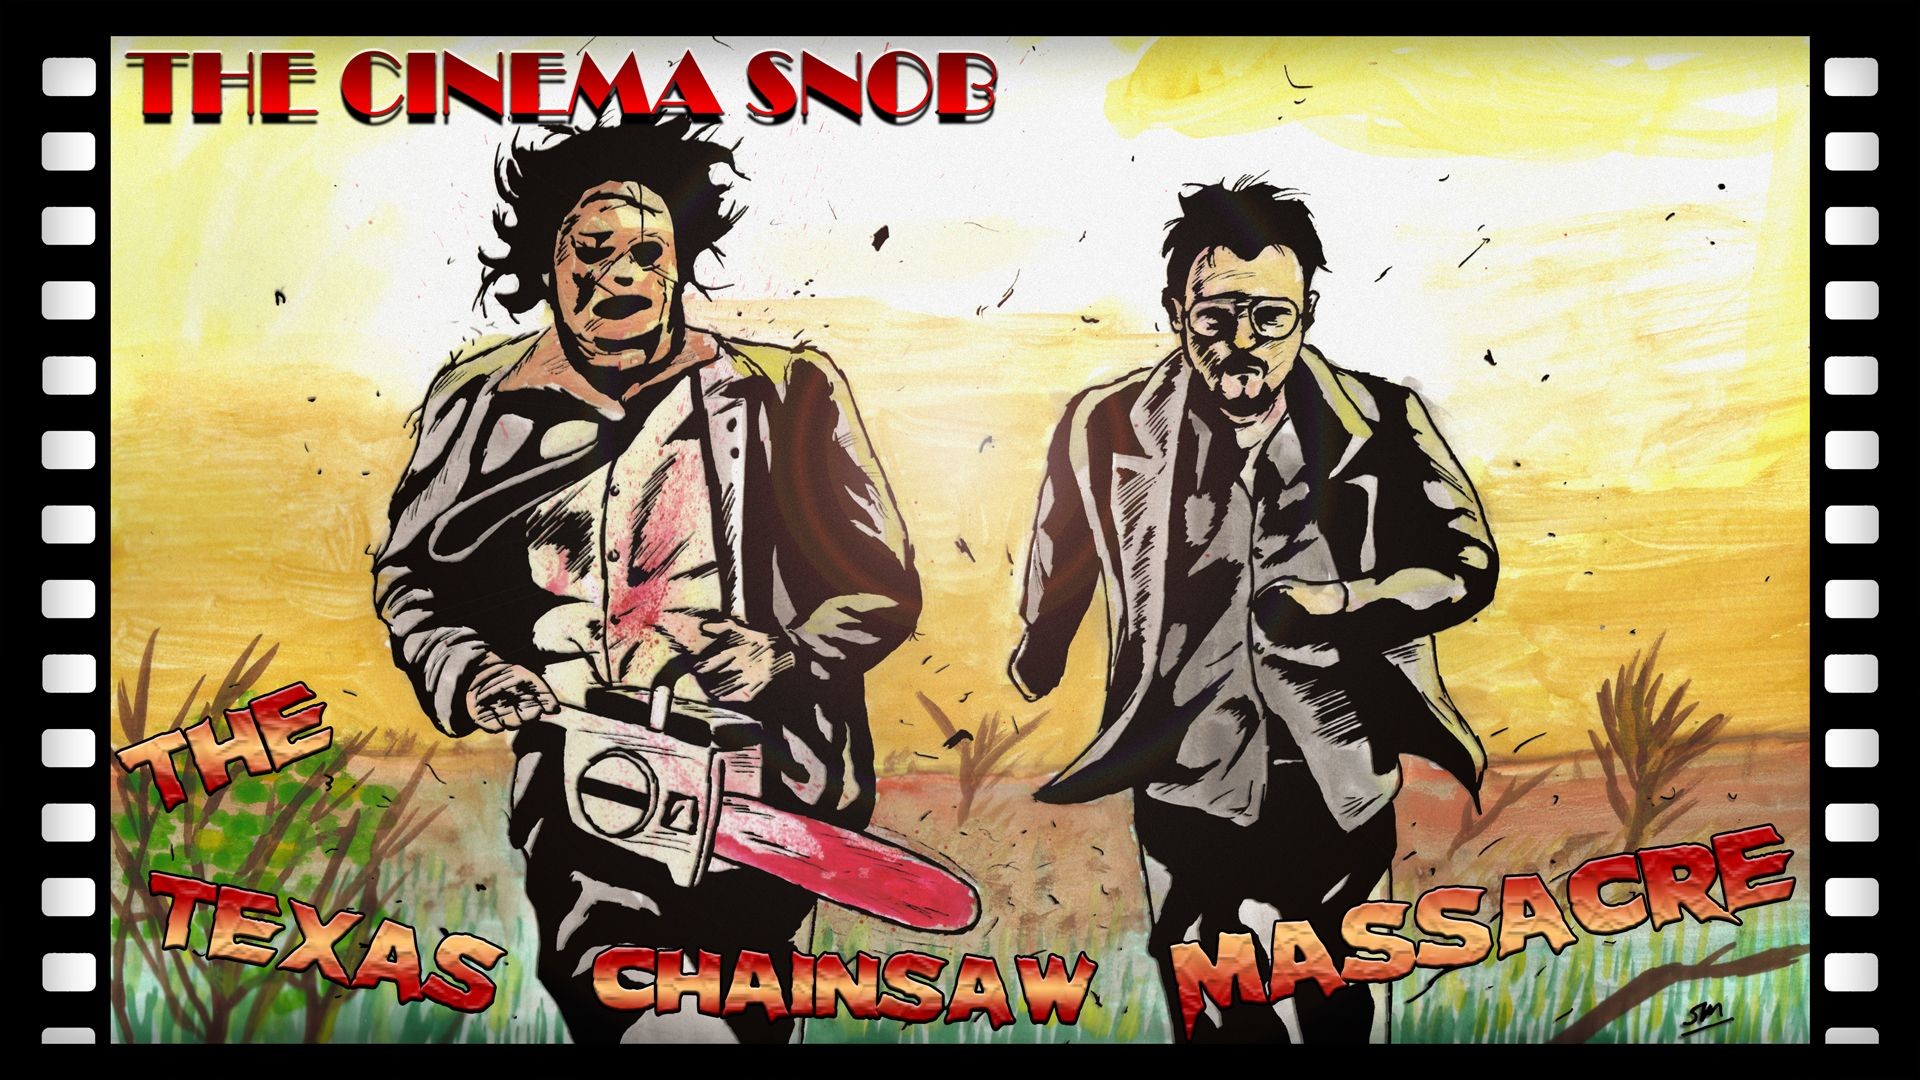 1920x1080 Texas Chainsaw Massacre favourites by esther8332hotmail on DeviantArt